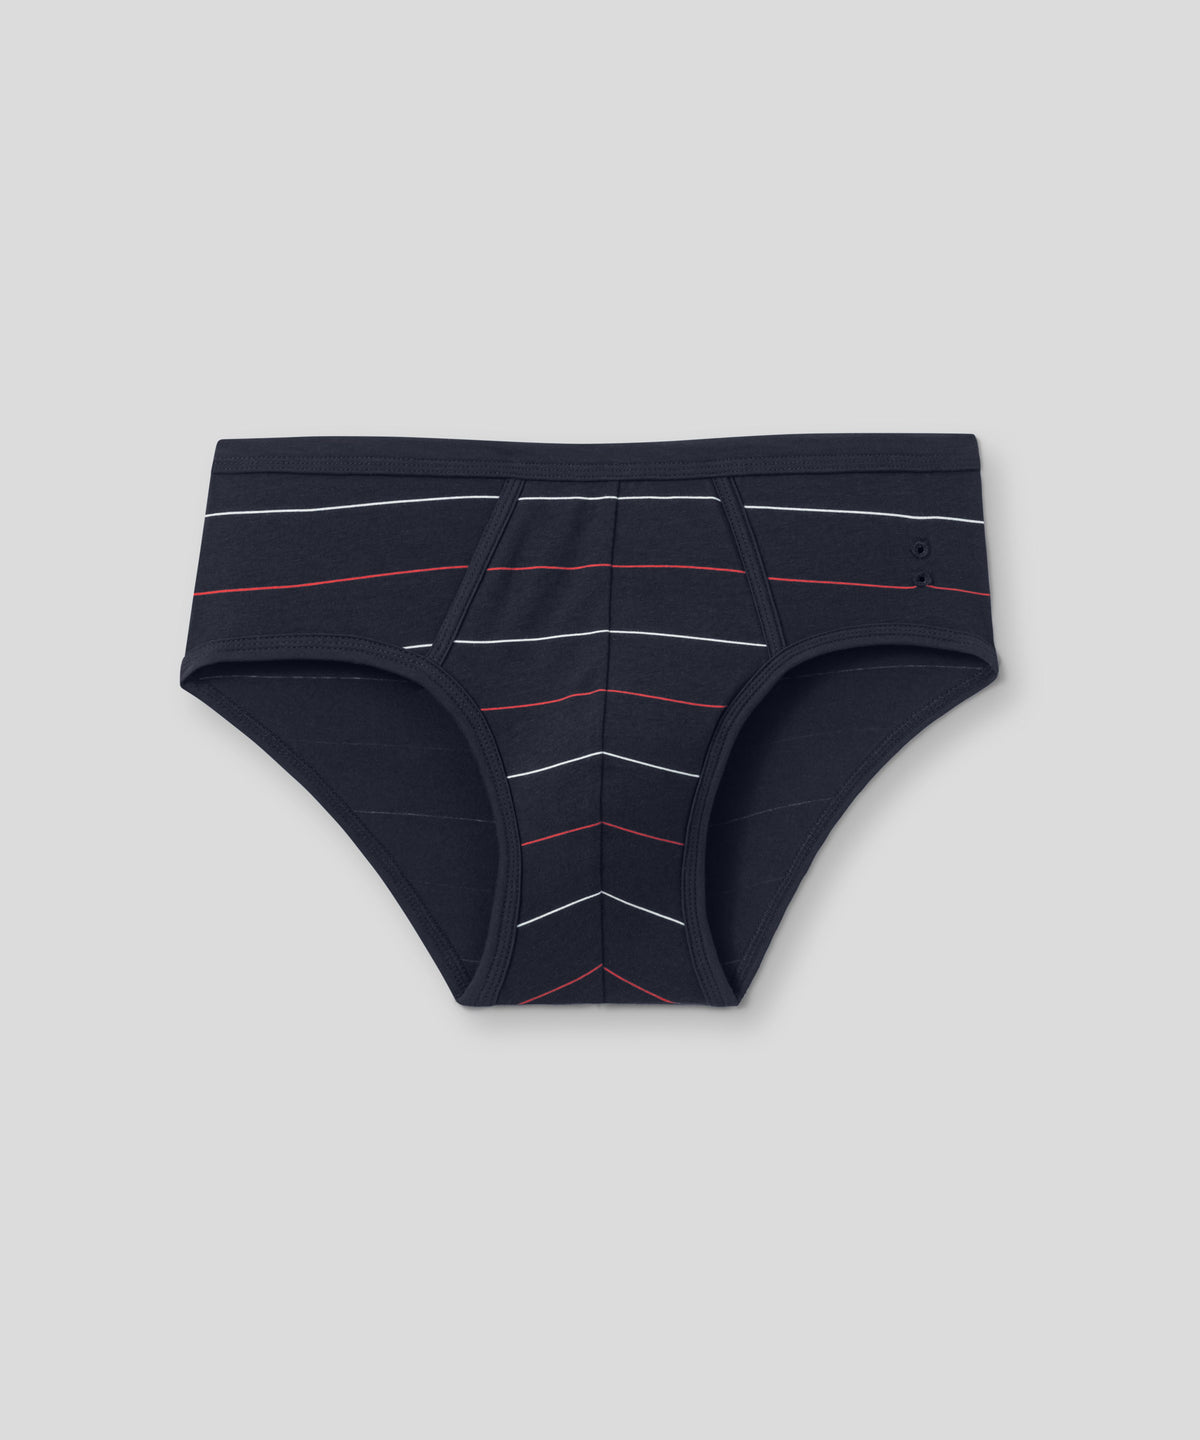 Marks briefs on X: Used briefs for sale. Can be customised